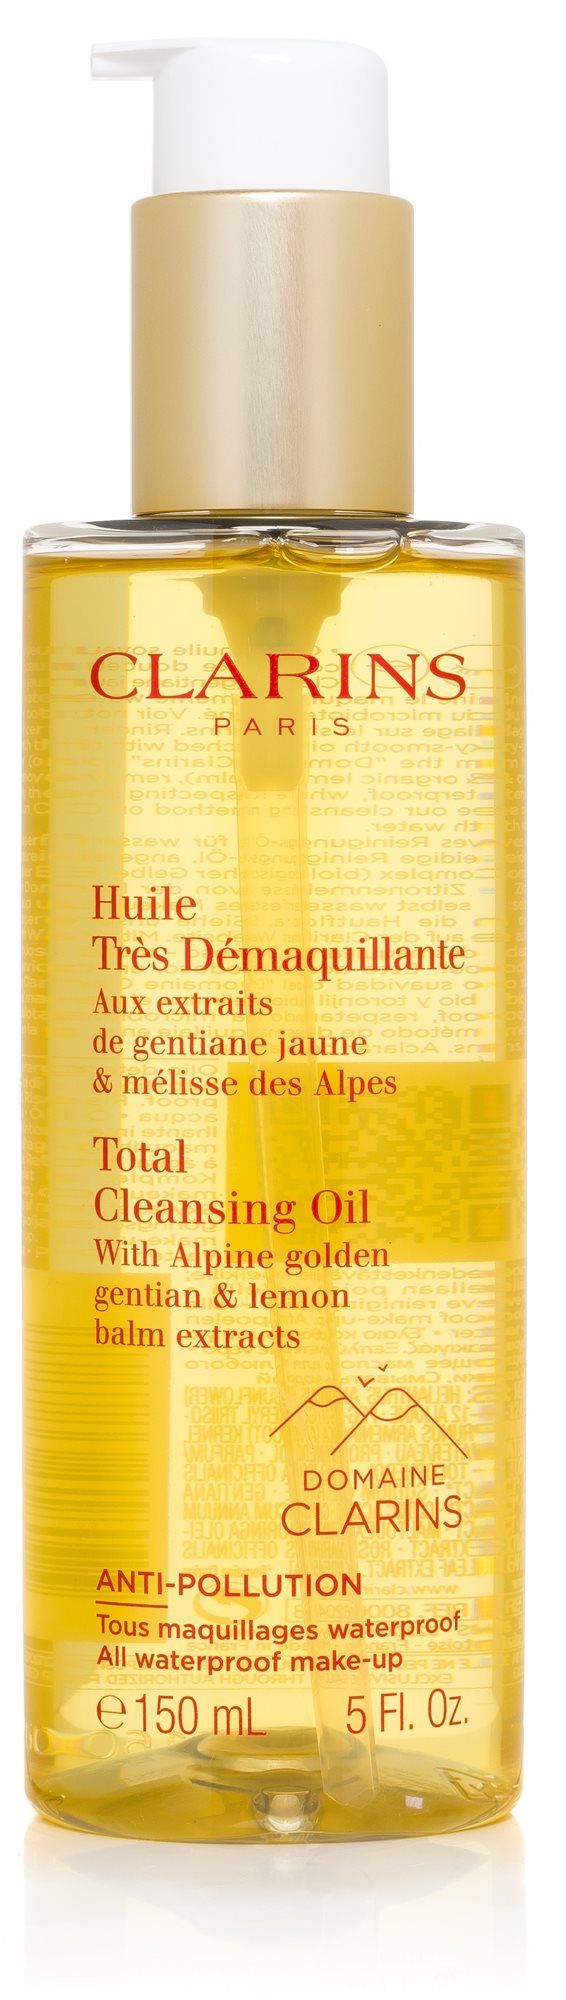 CLARINS Total Cleansing Oil 150 ml